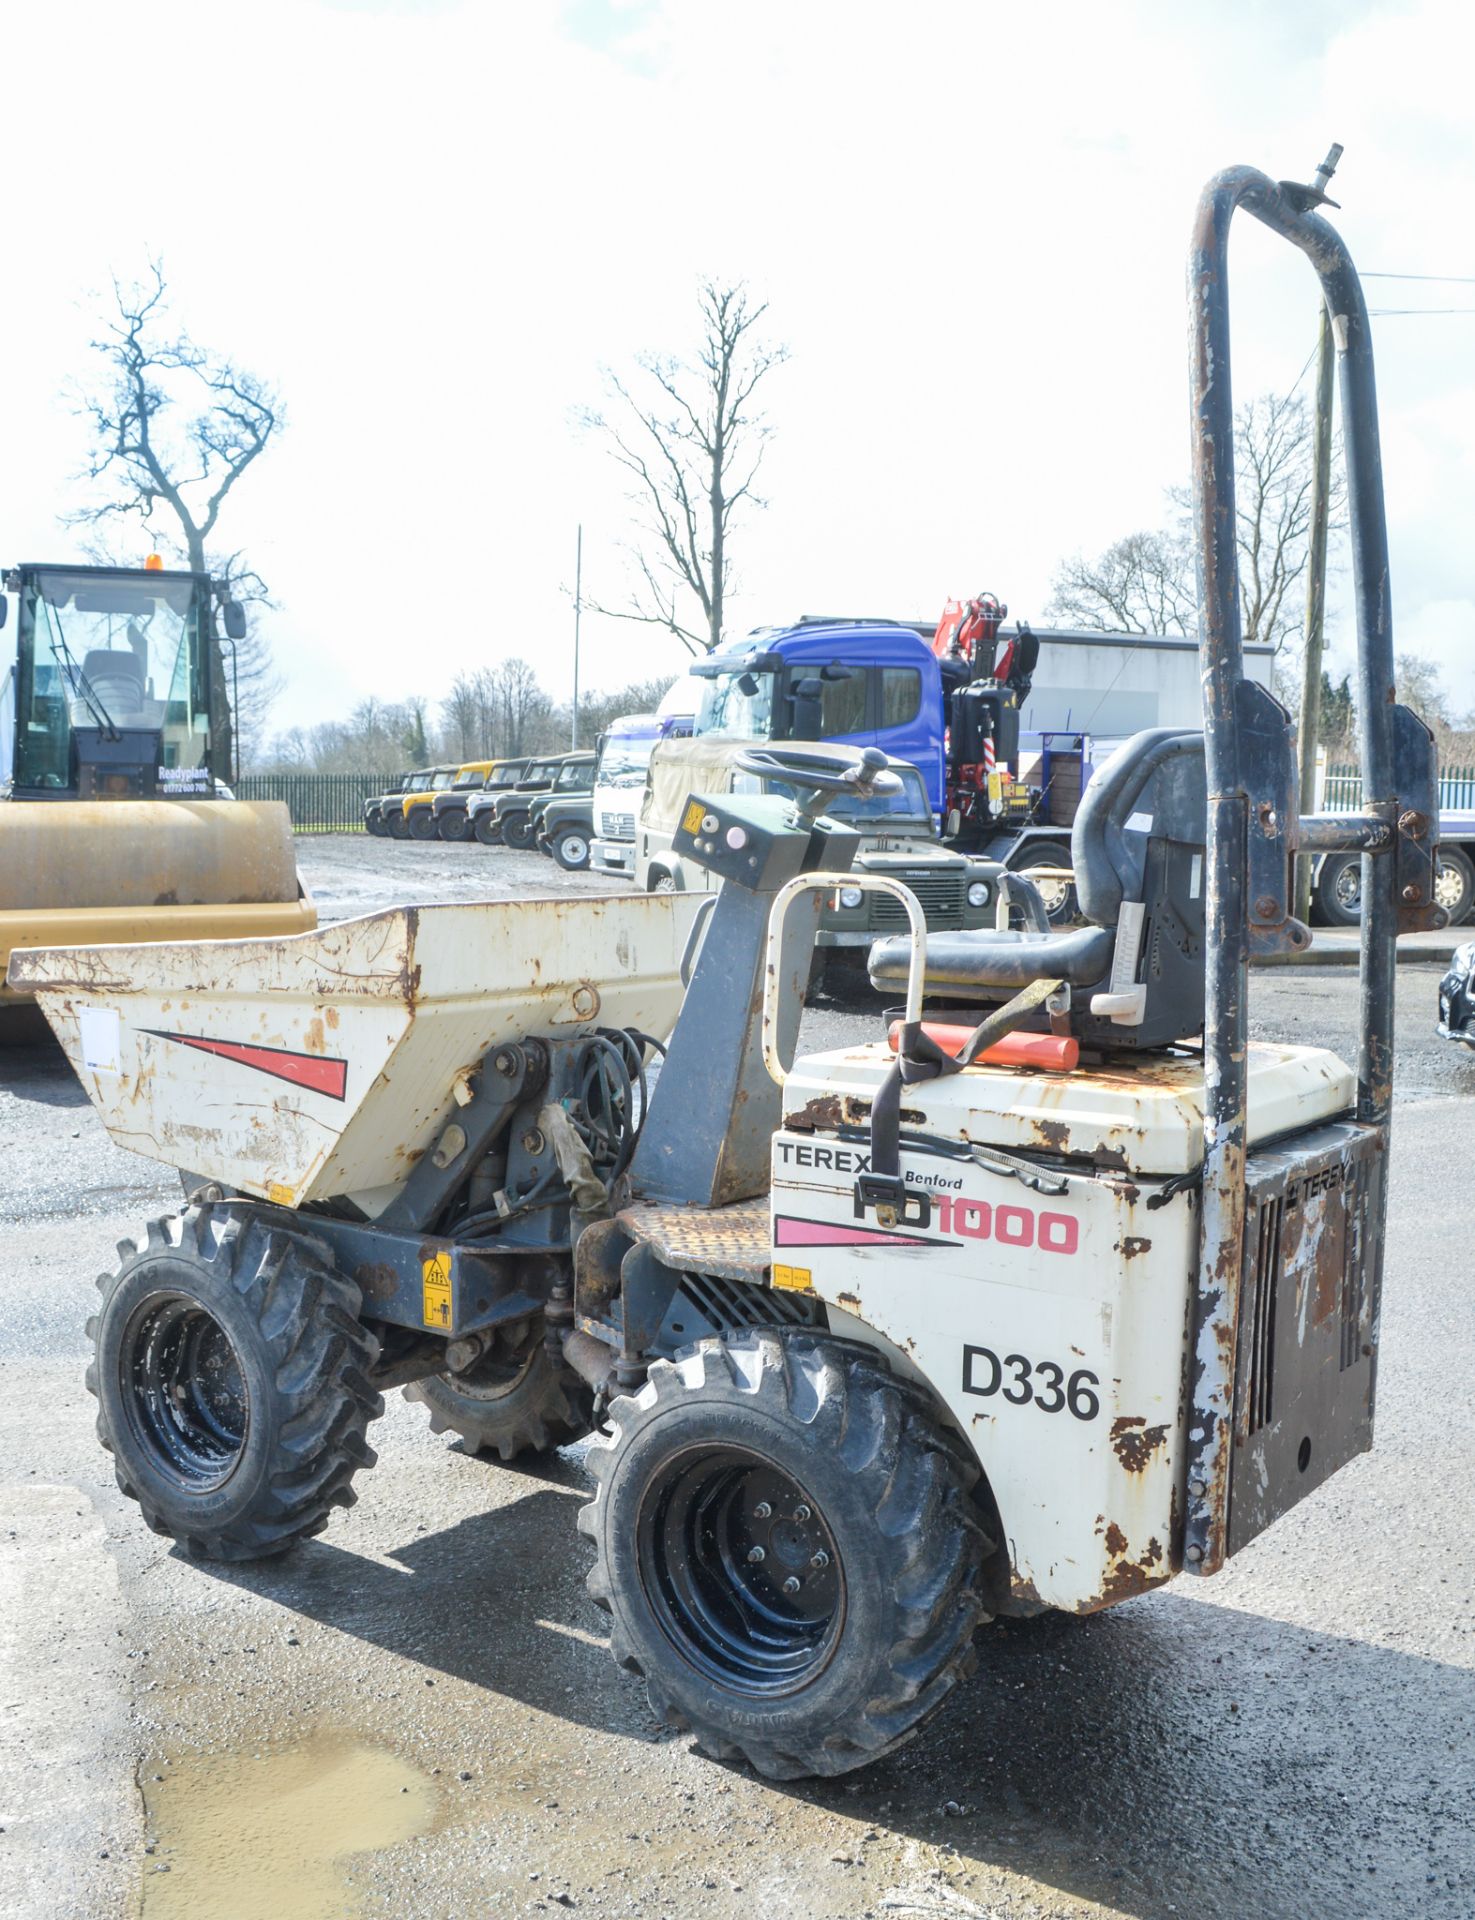 Benford Terex HD 1000 high tip dumper Year: 2007 S/N: E703FT231 Recorded Hours: 2184 - Image 3 of 7